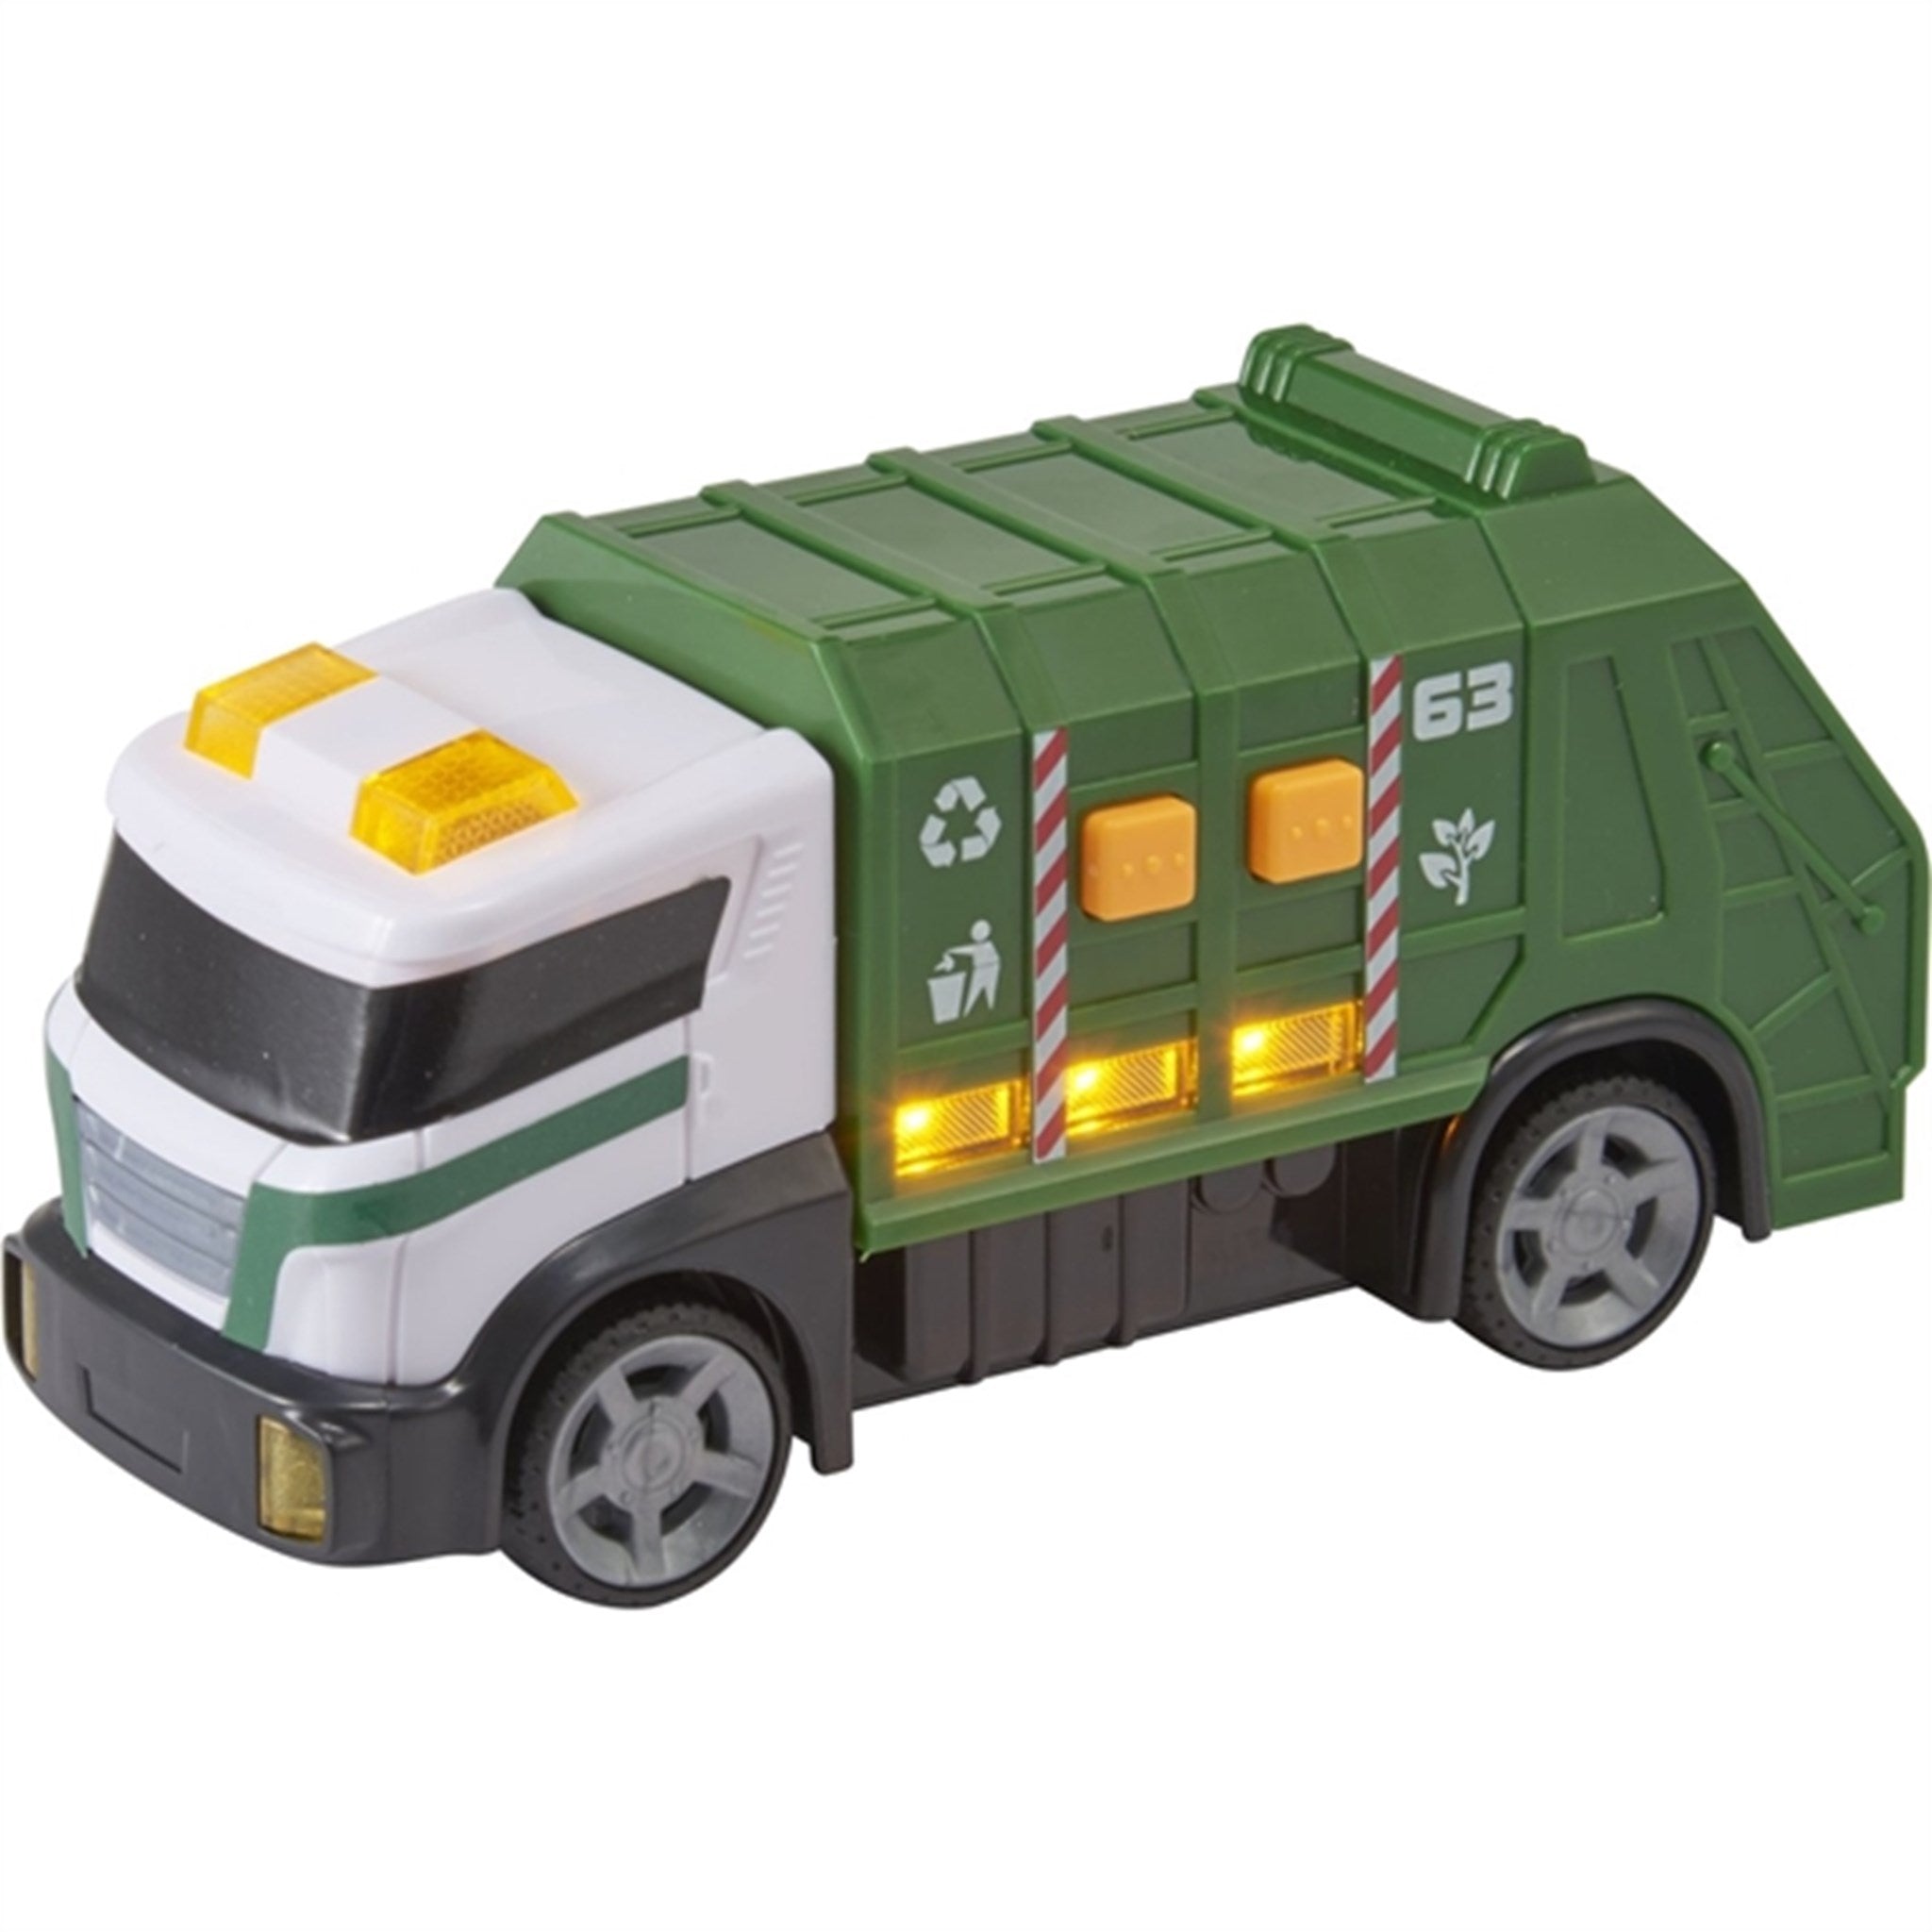 Teamsterz Small L&S Garbage Truck